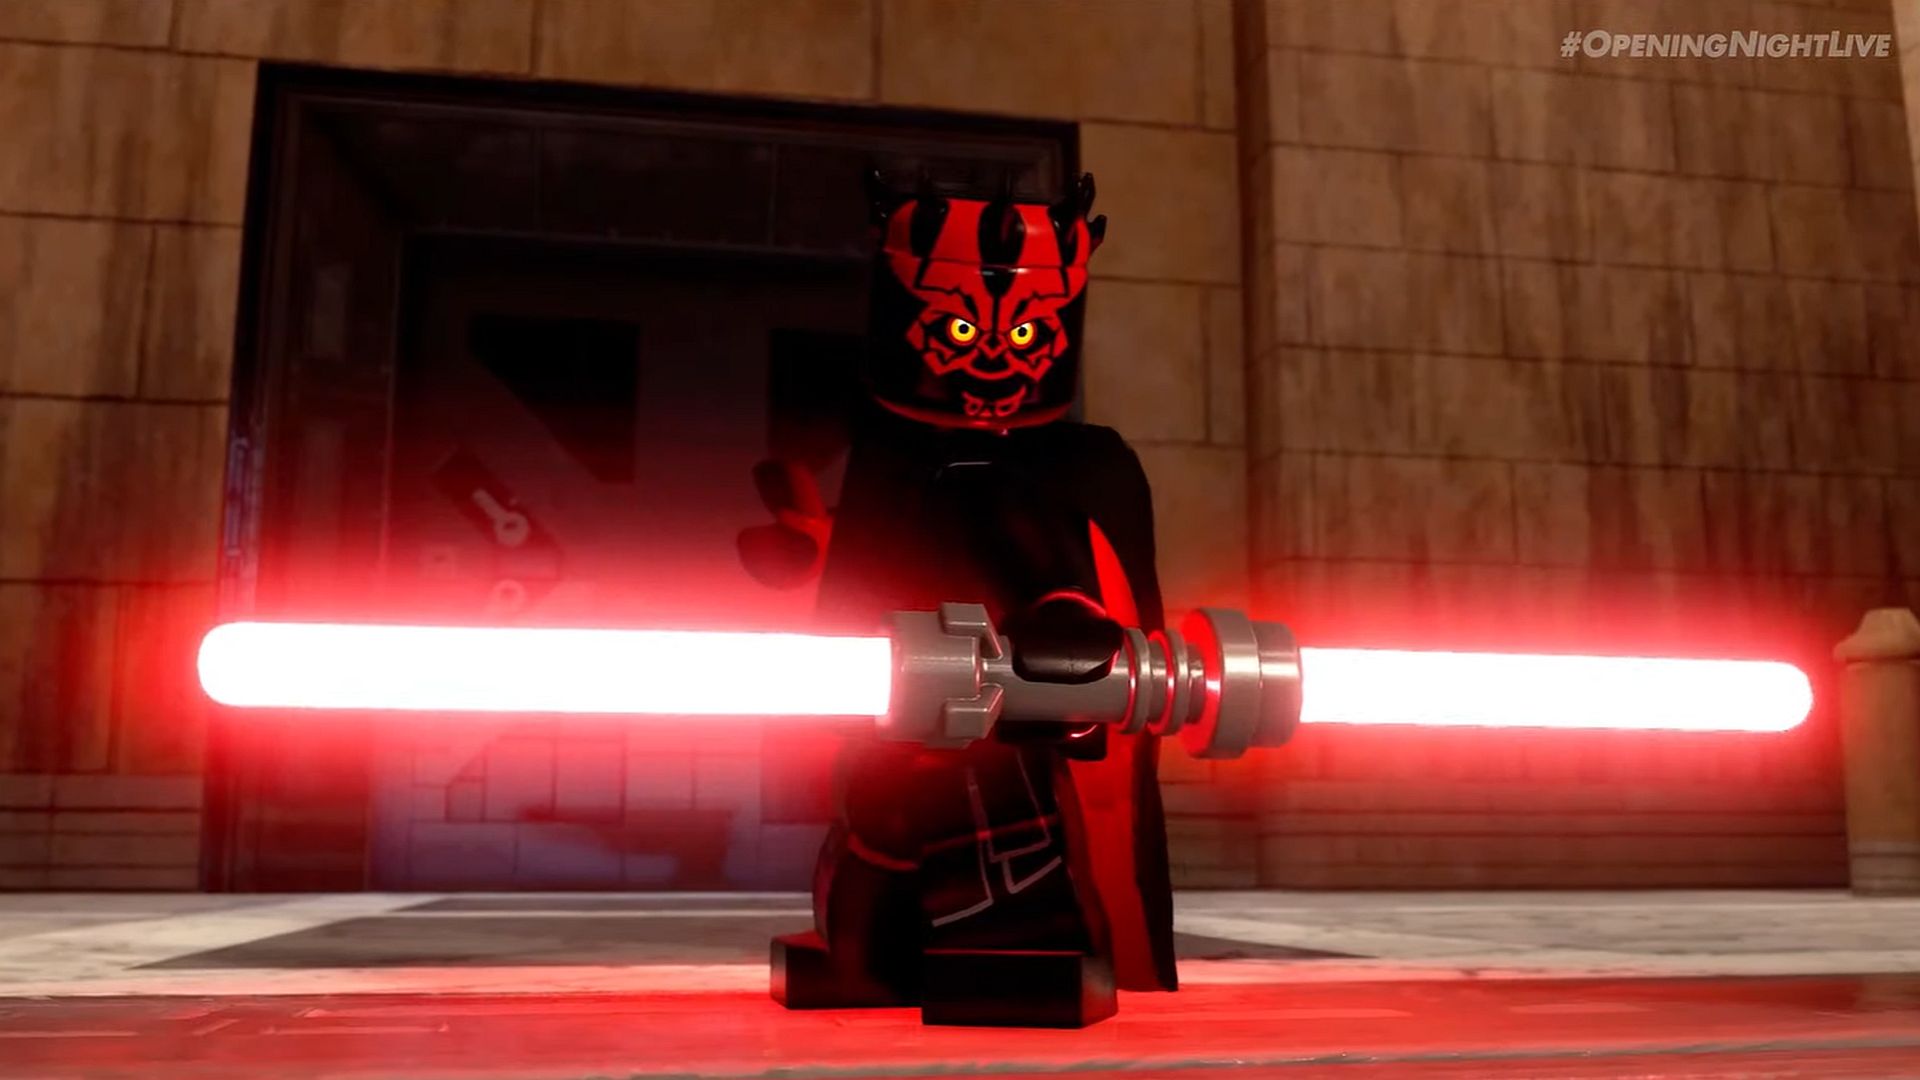 Lego Star Wars: The Skywalker Saga Launched by